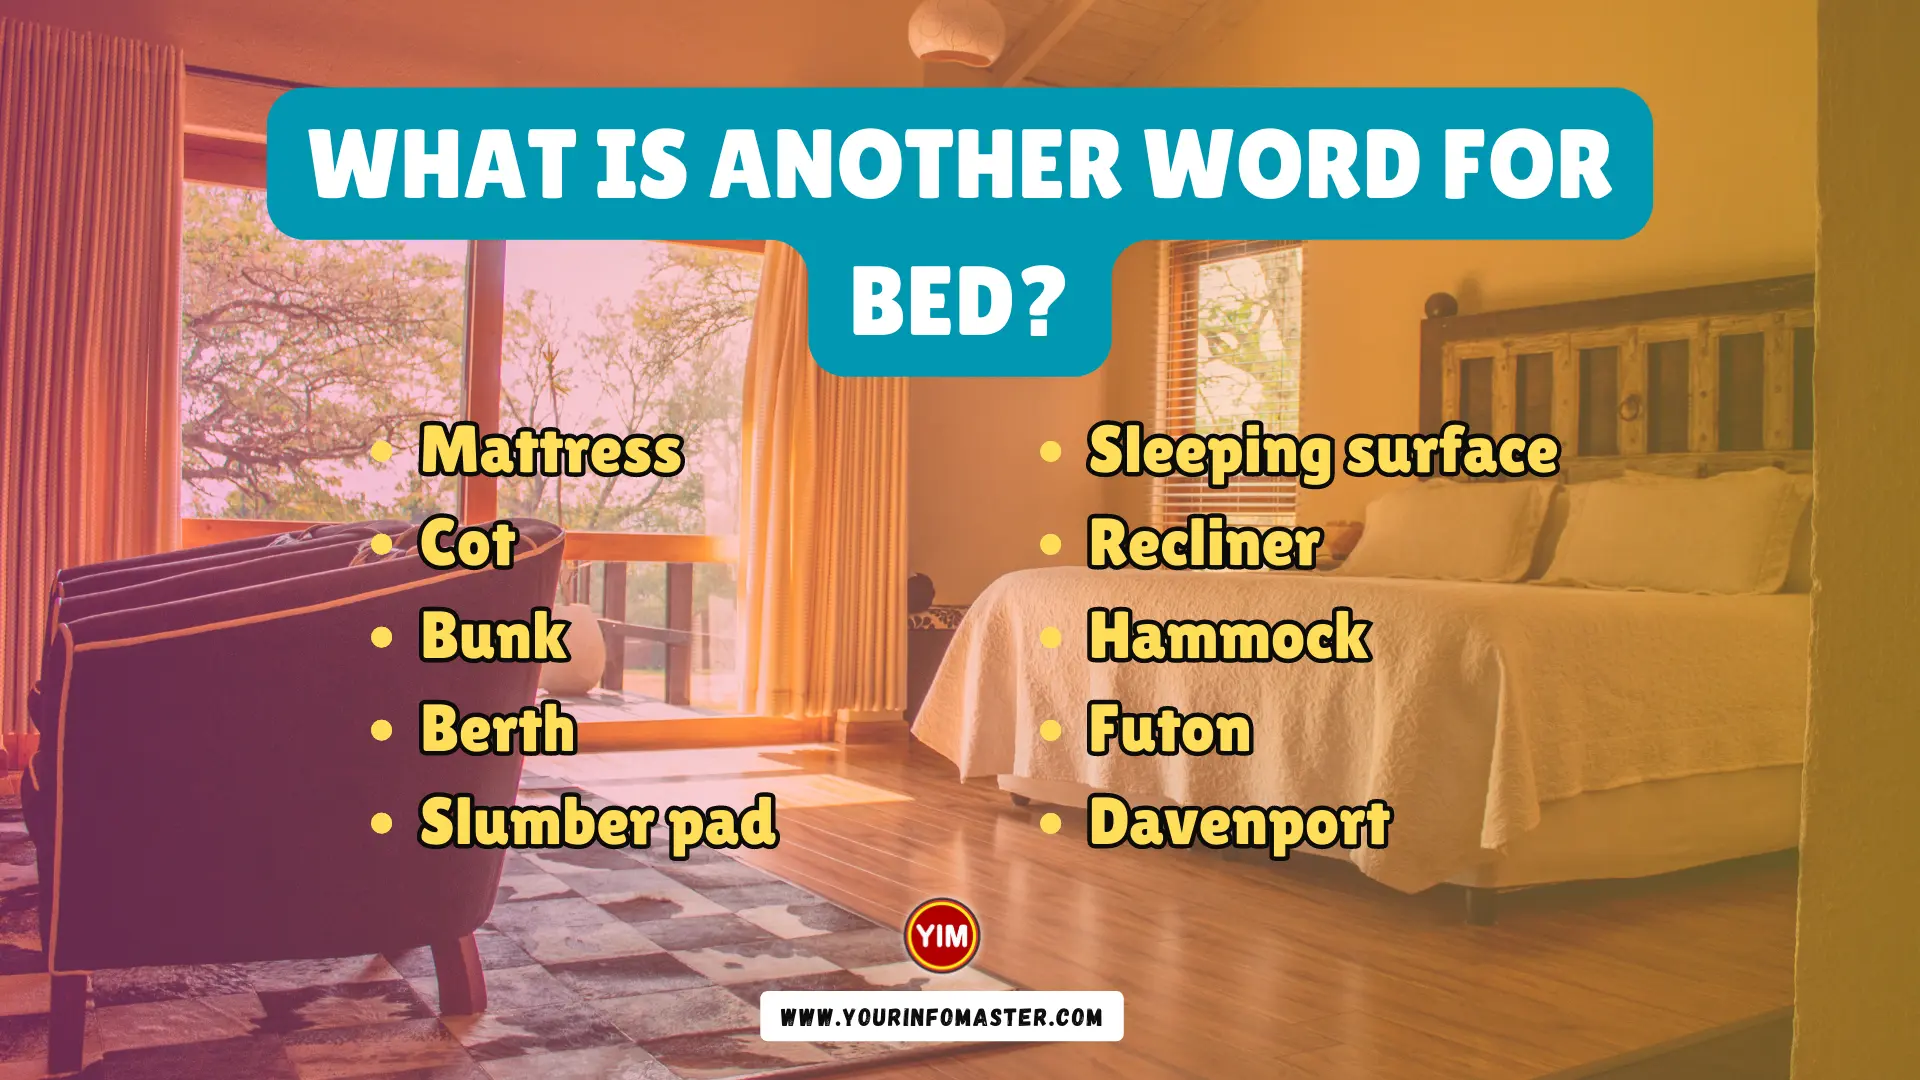 What is another word for Bed